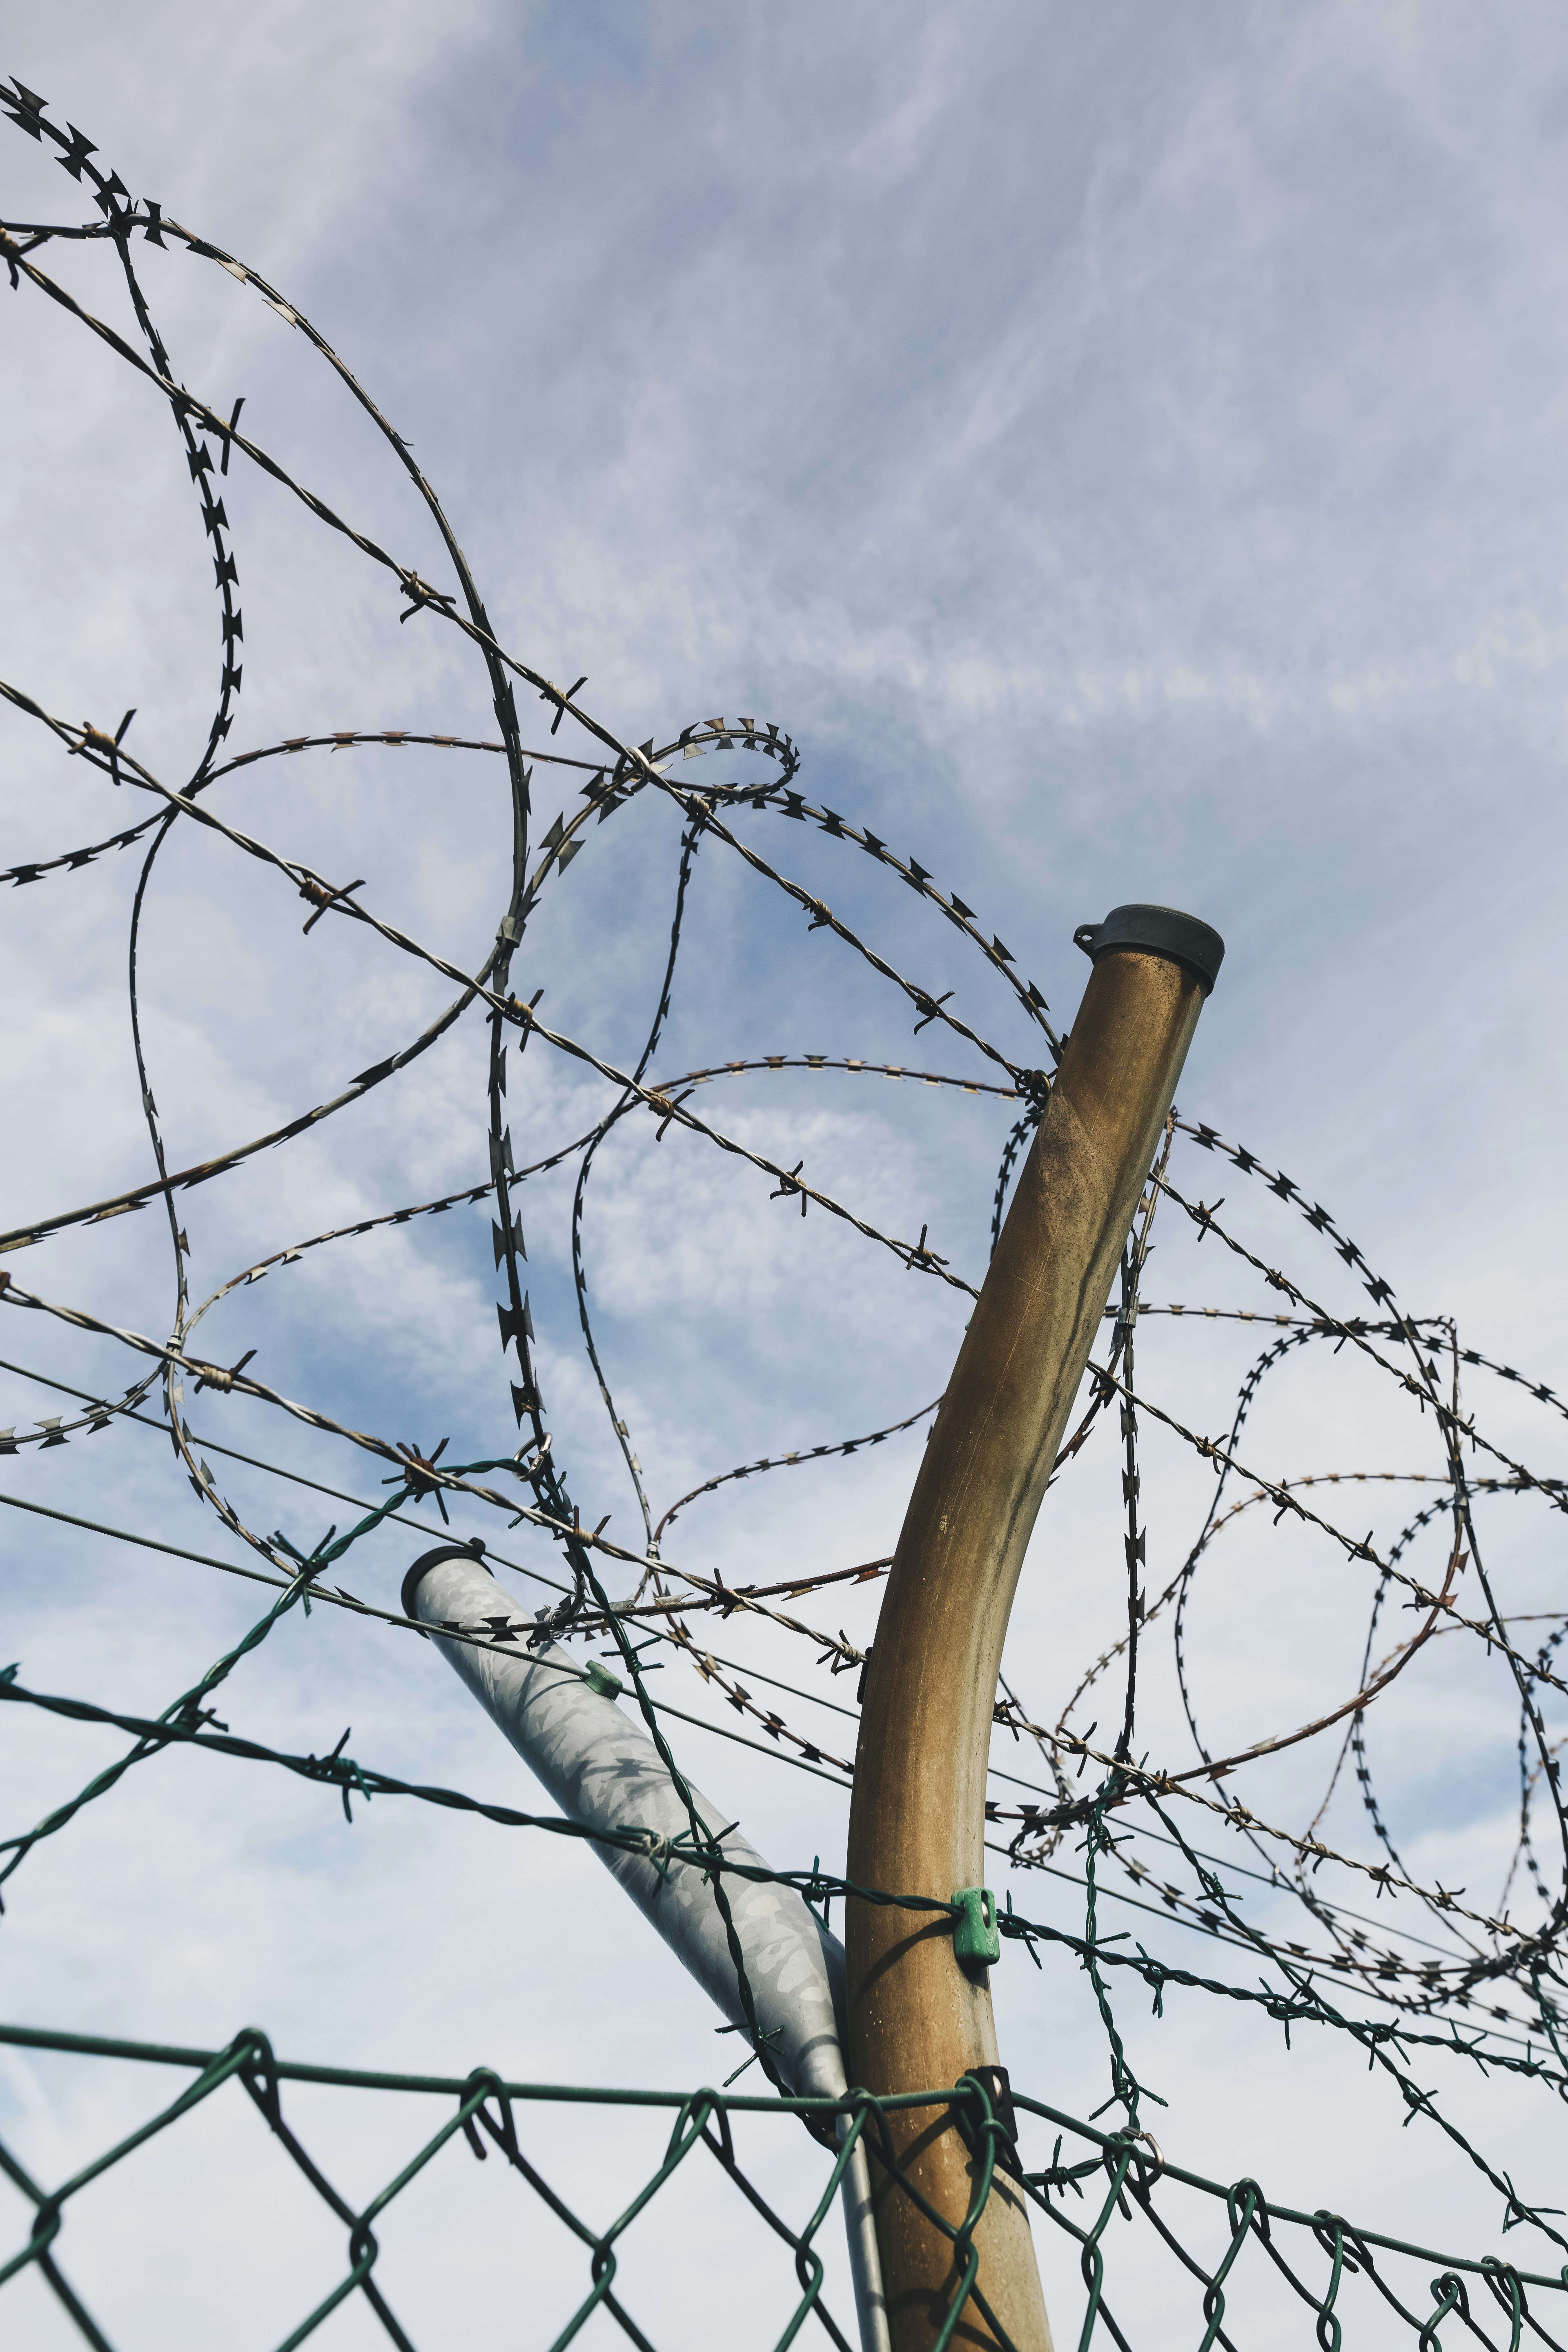 Border fence barbed wire